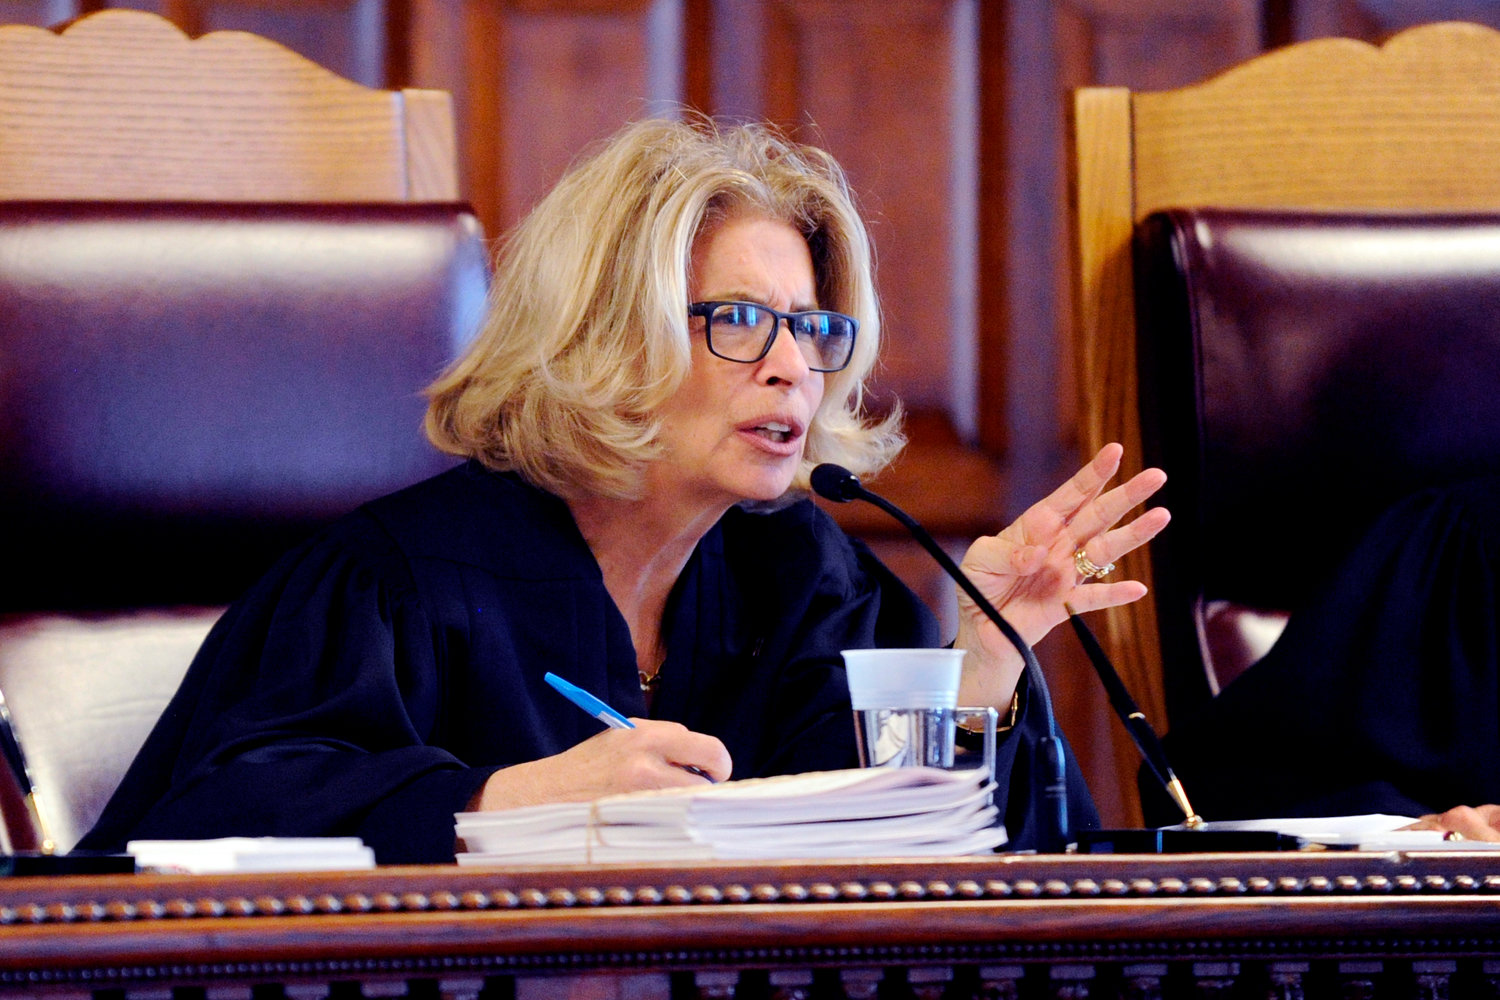 New York Court of Appeals Chief Judge Janet DiFiore, asks questions during oral arguments at the Court of Appeals, June 1, 2016, in Albany, N.Y. Di Fiore announced Monday, July 11, 2022, she will step down after more than six years presiding at the state's highest court and overseeing the state court system.